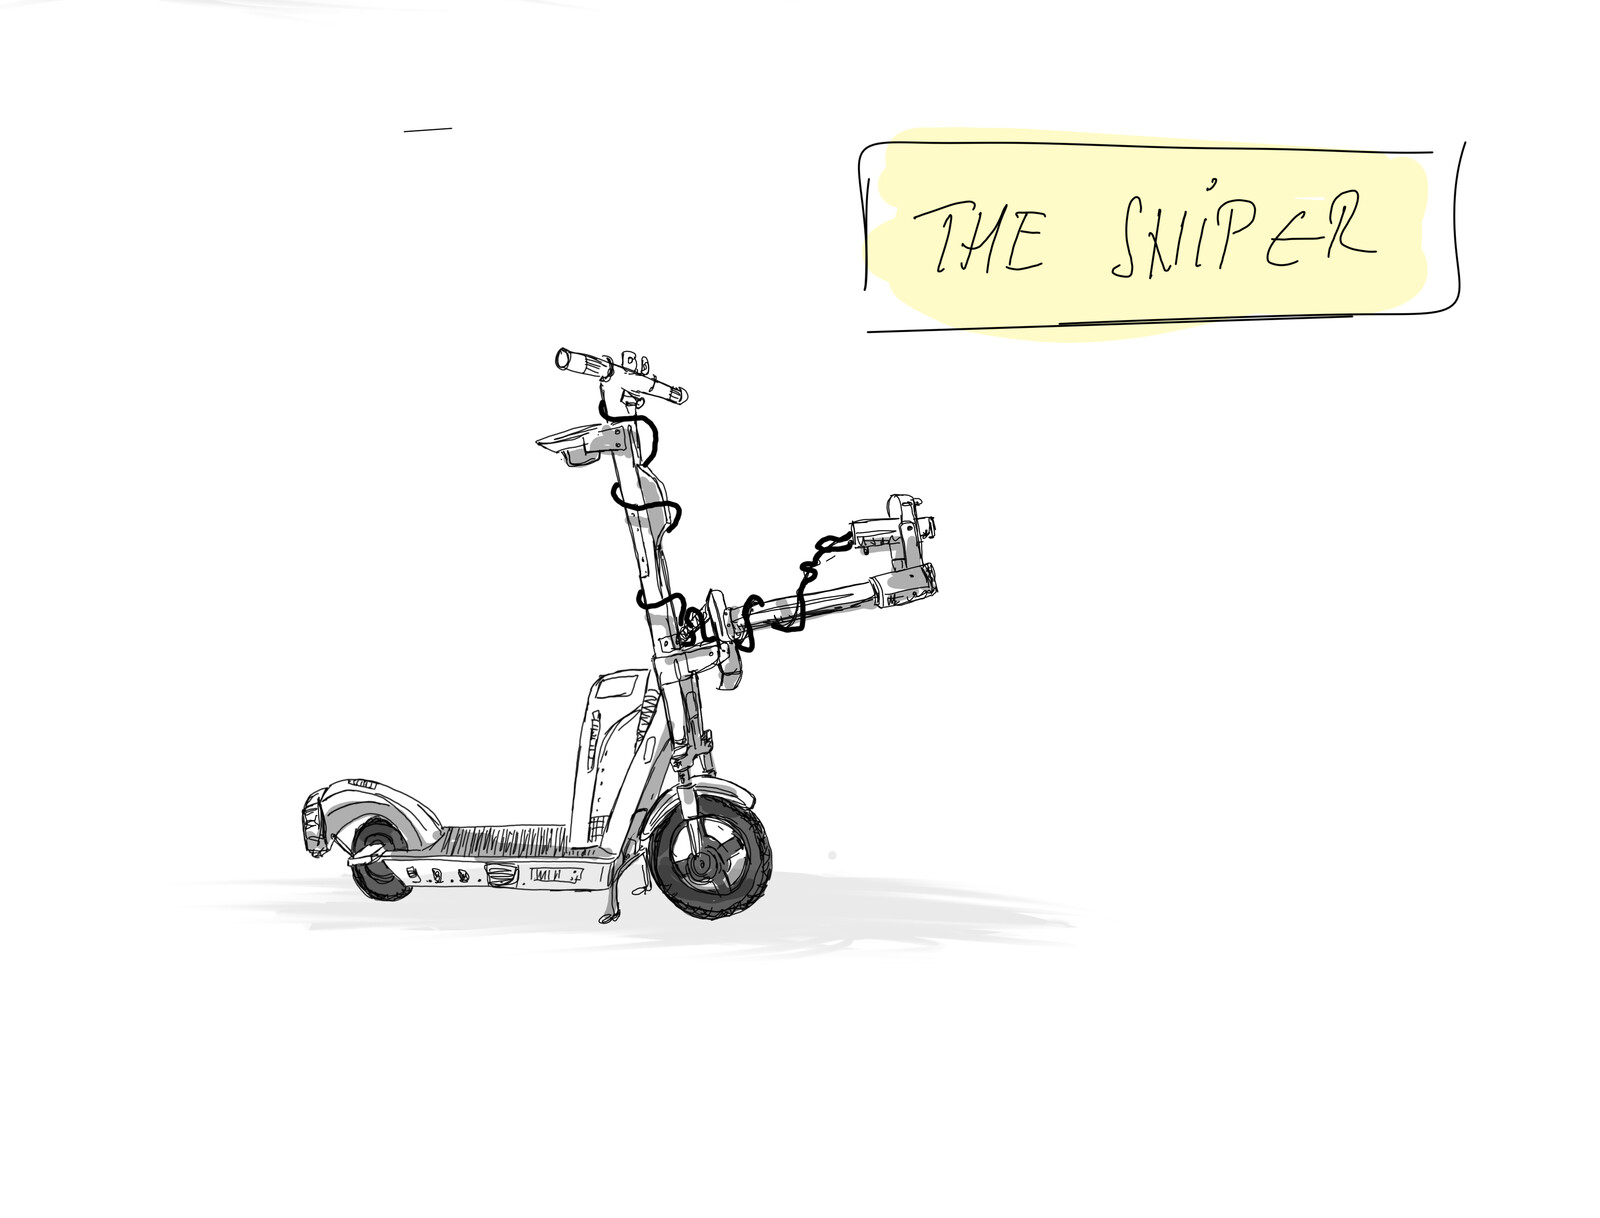 Vehicle 05. The Sniper